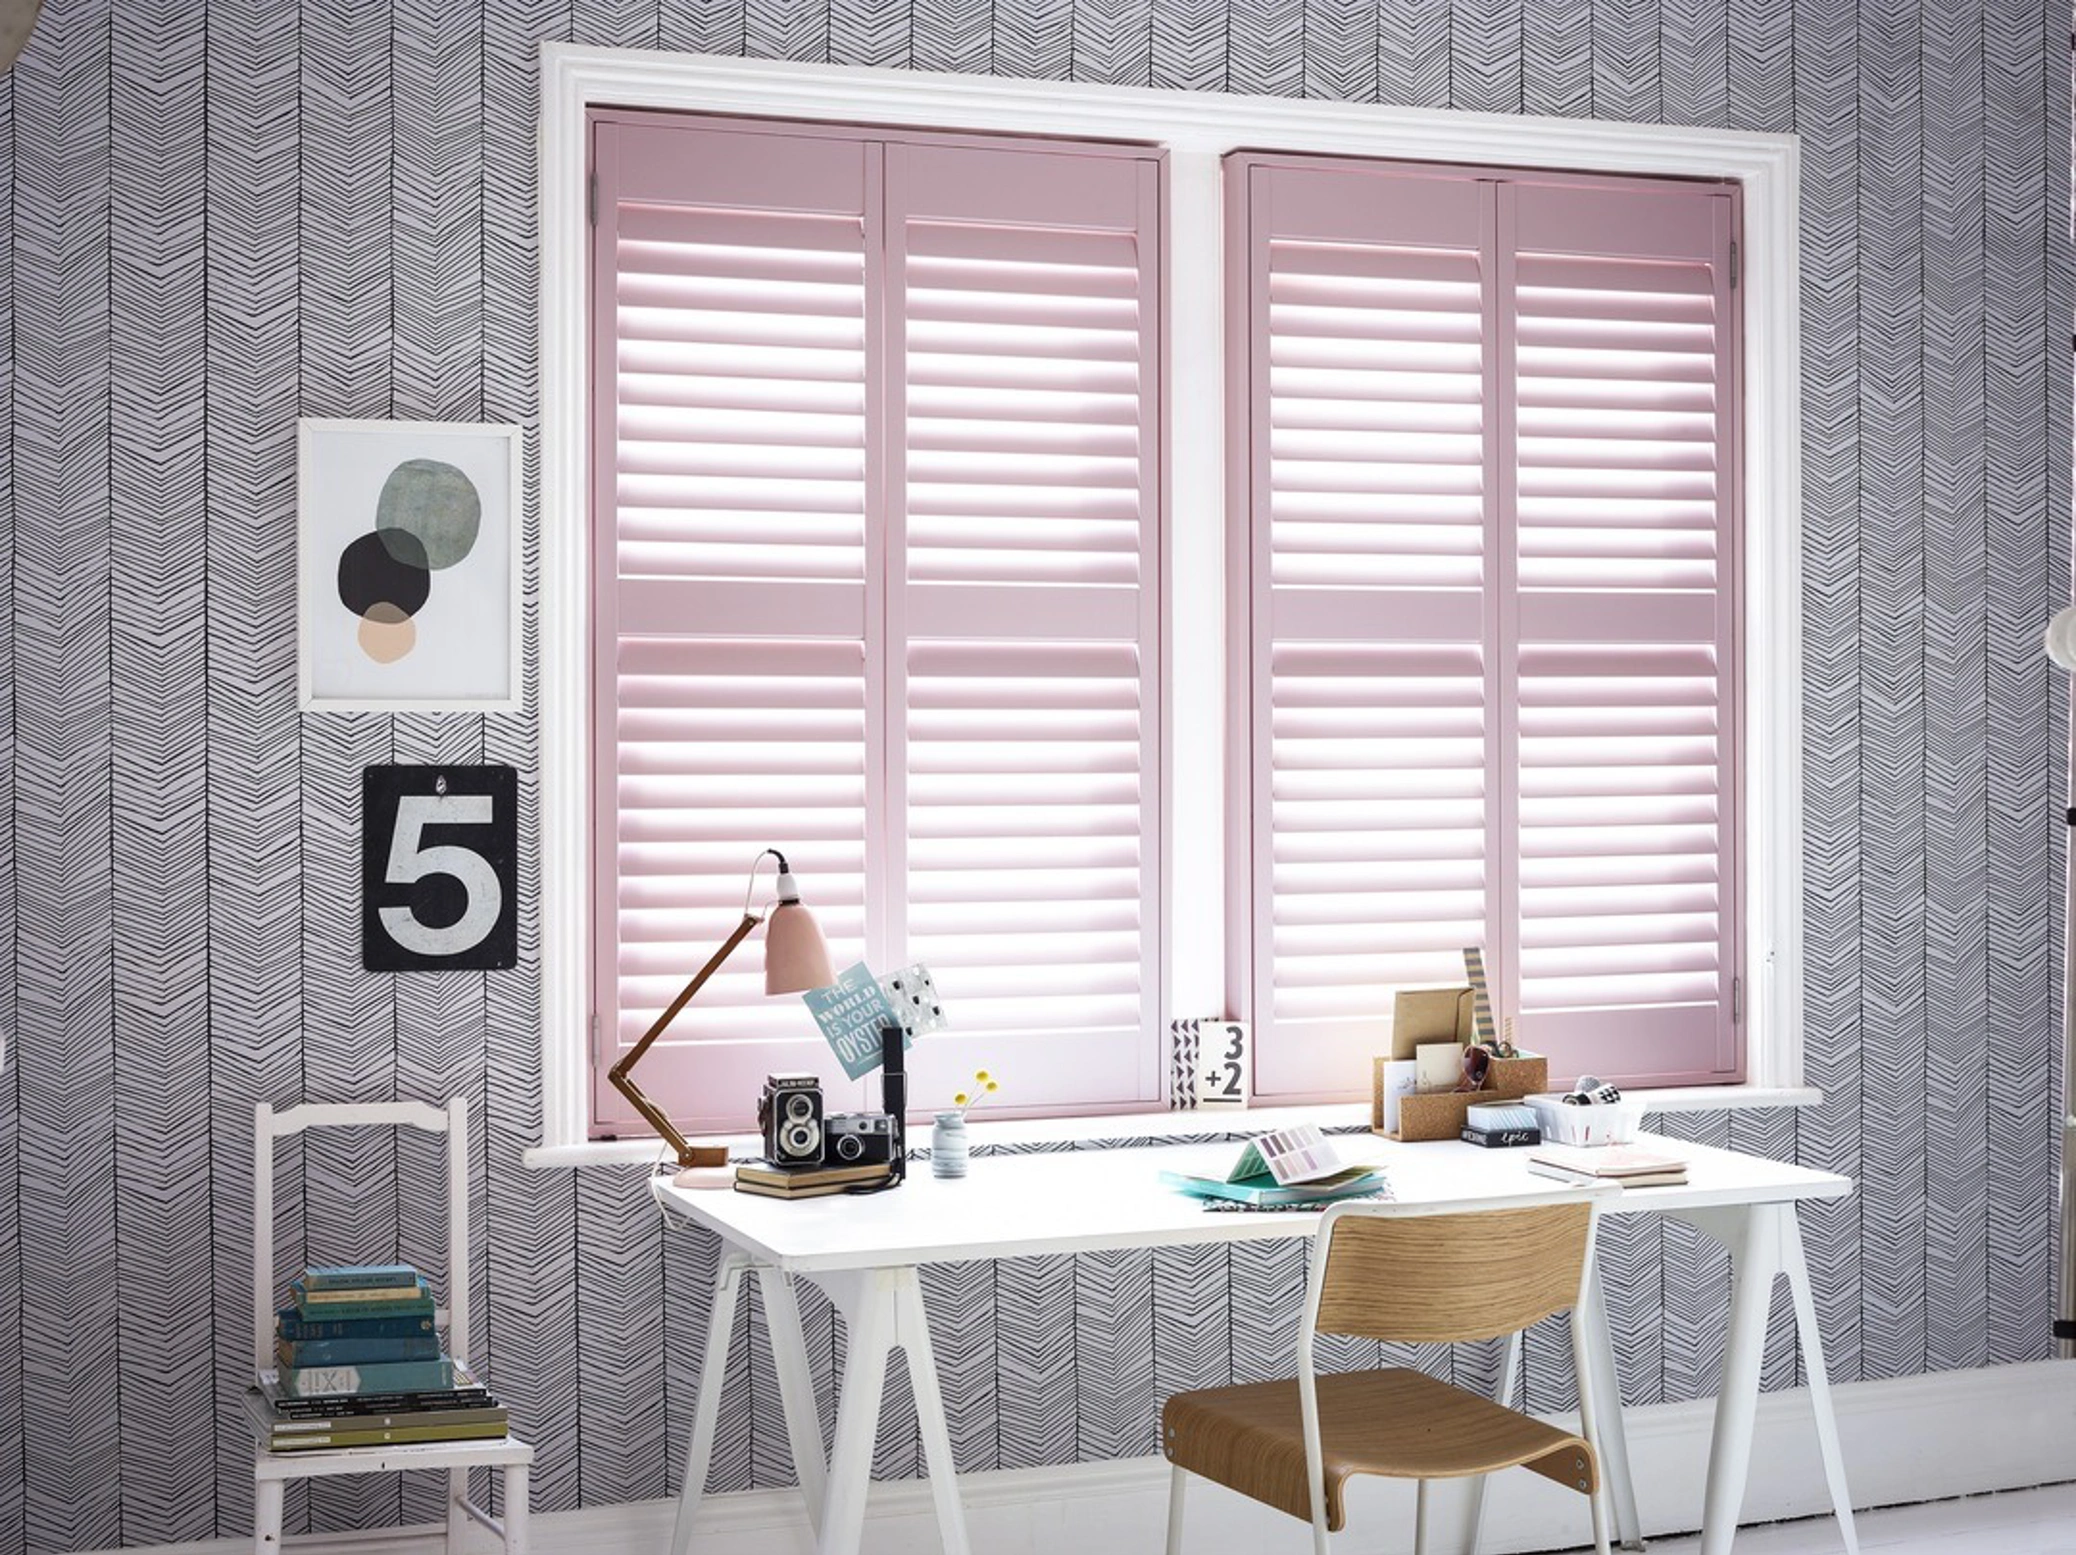 Full height pink wooden shutters in home office